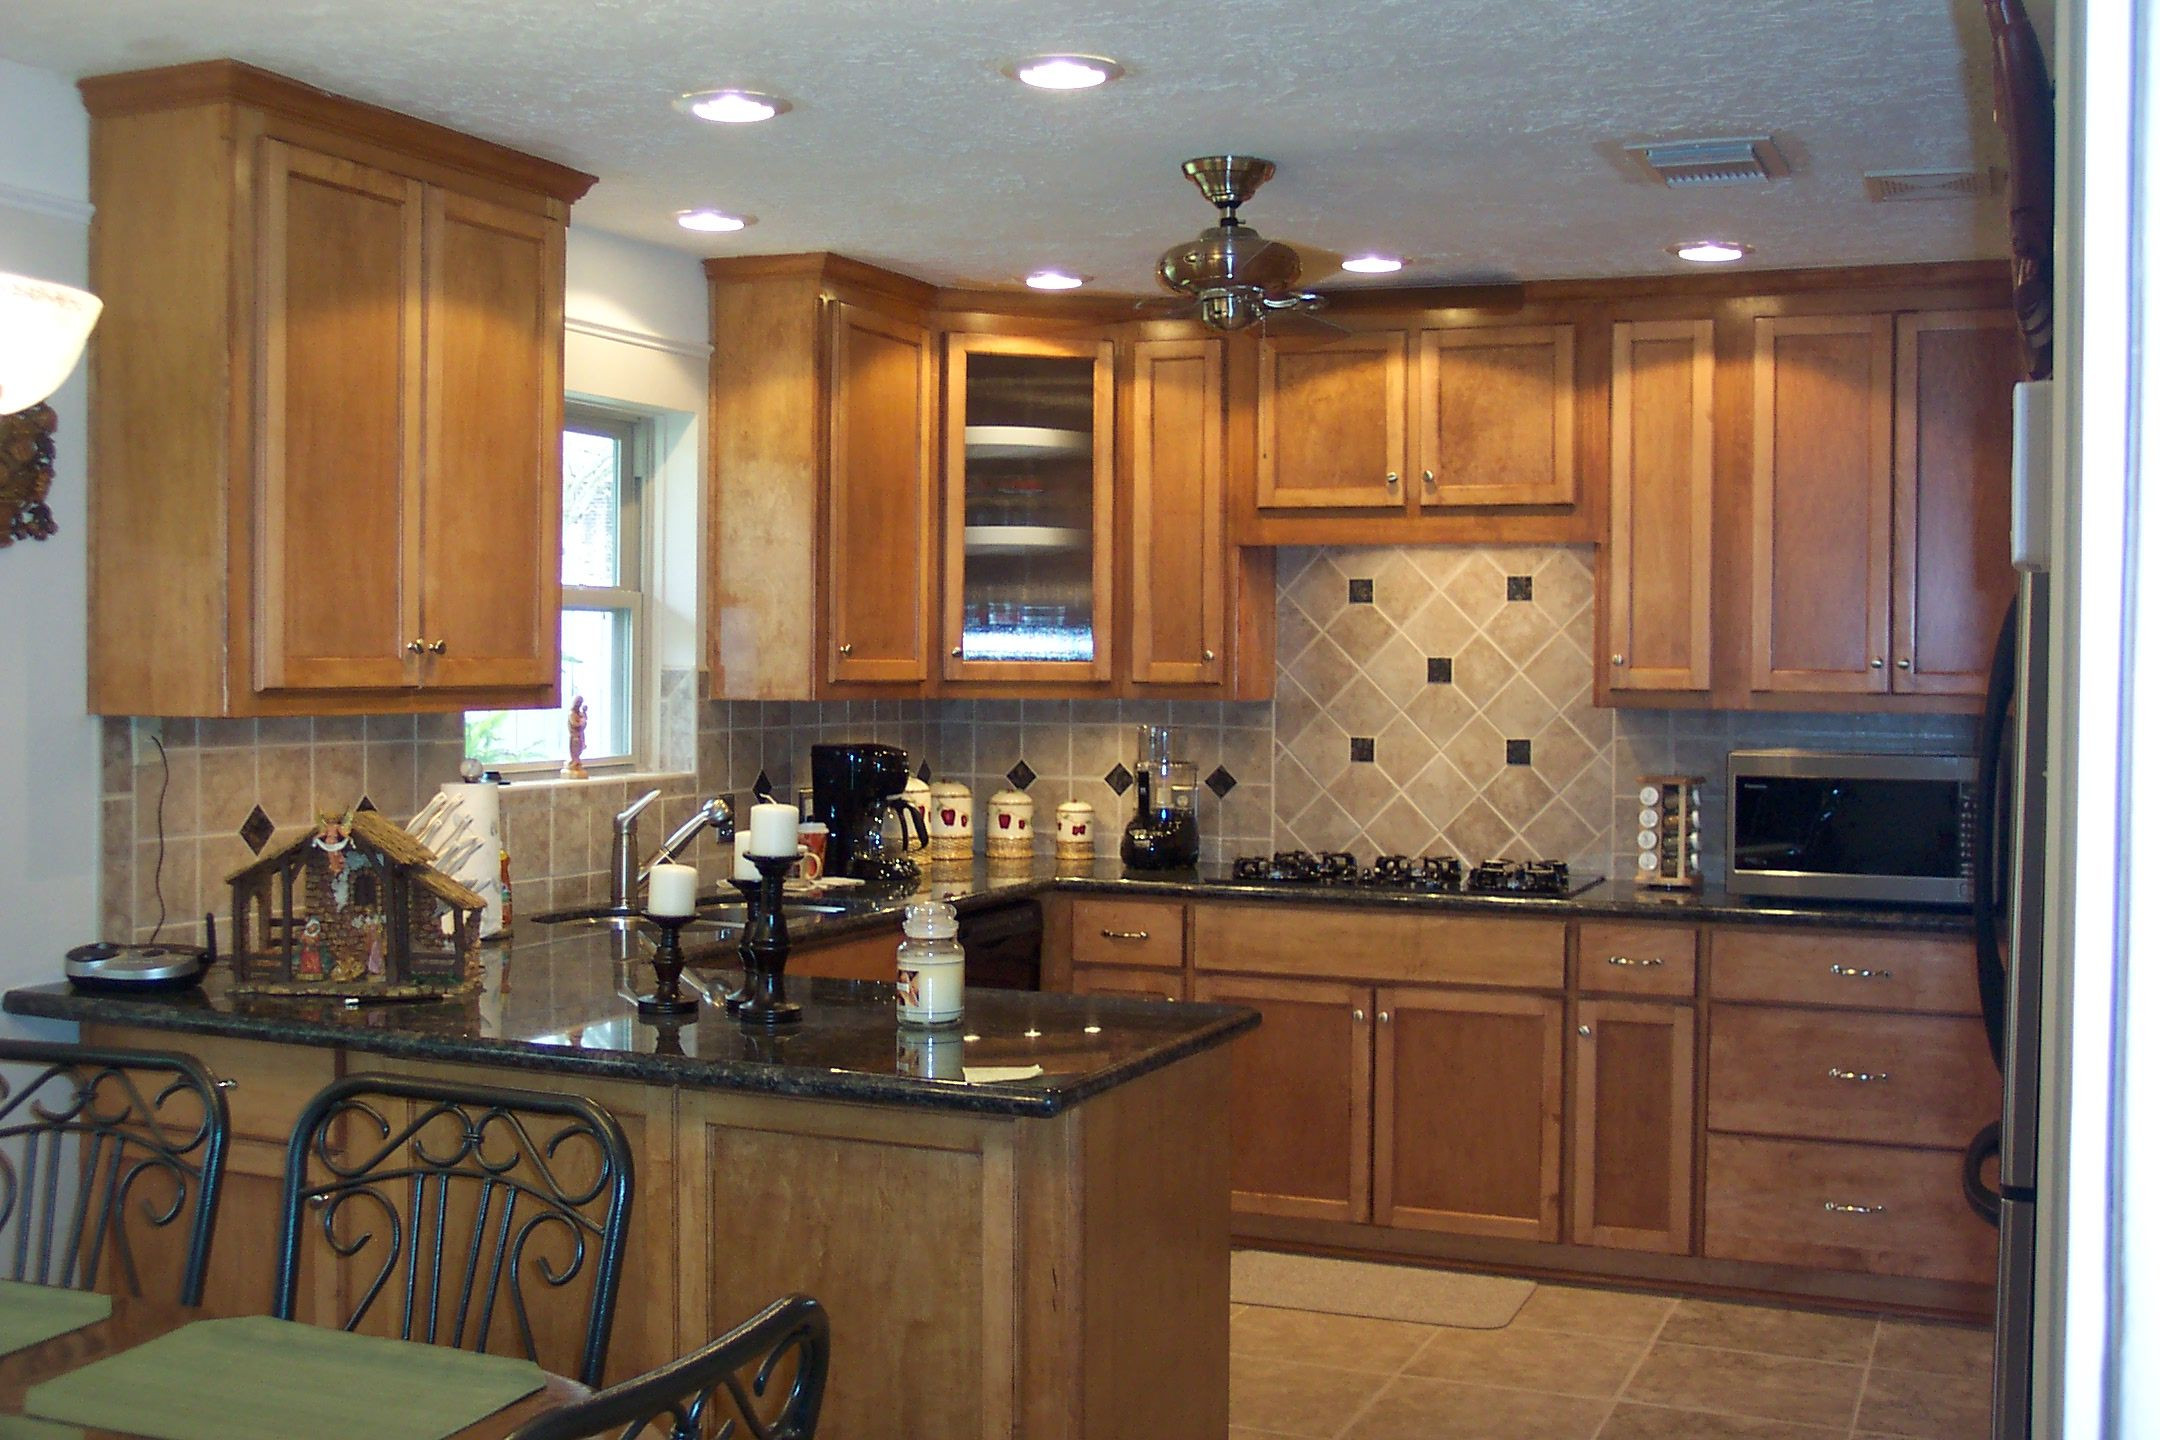 Remodeling Ideas For Small Kitchen
 Small Kitchens a Bud